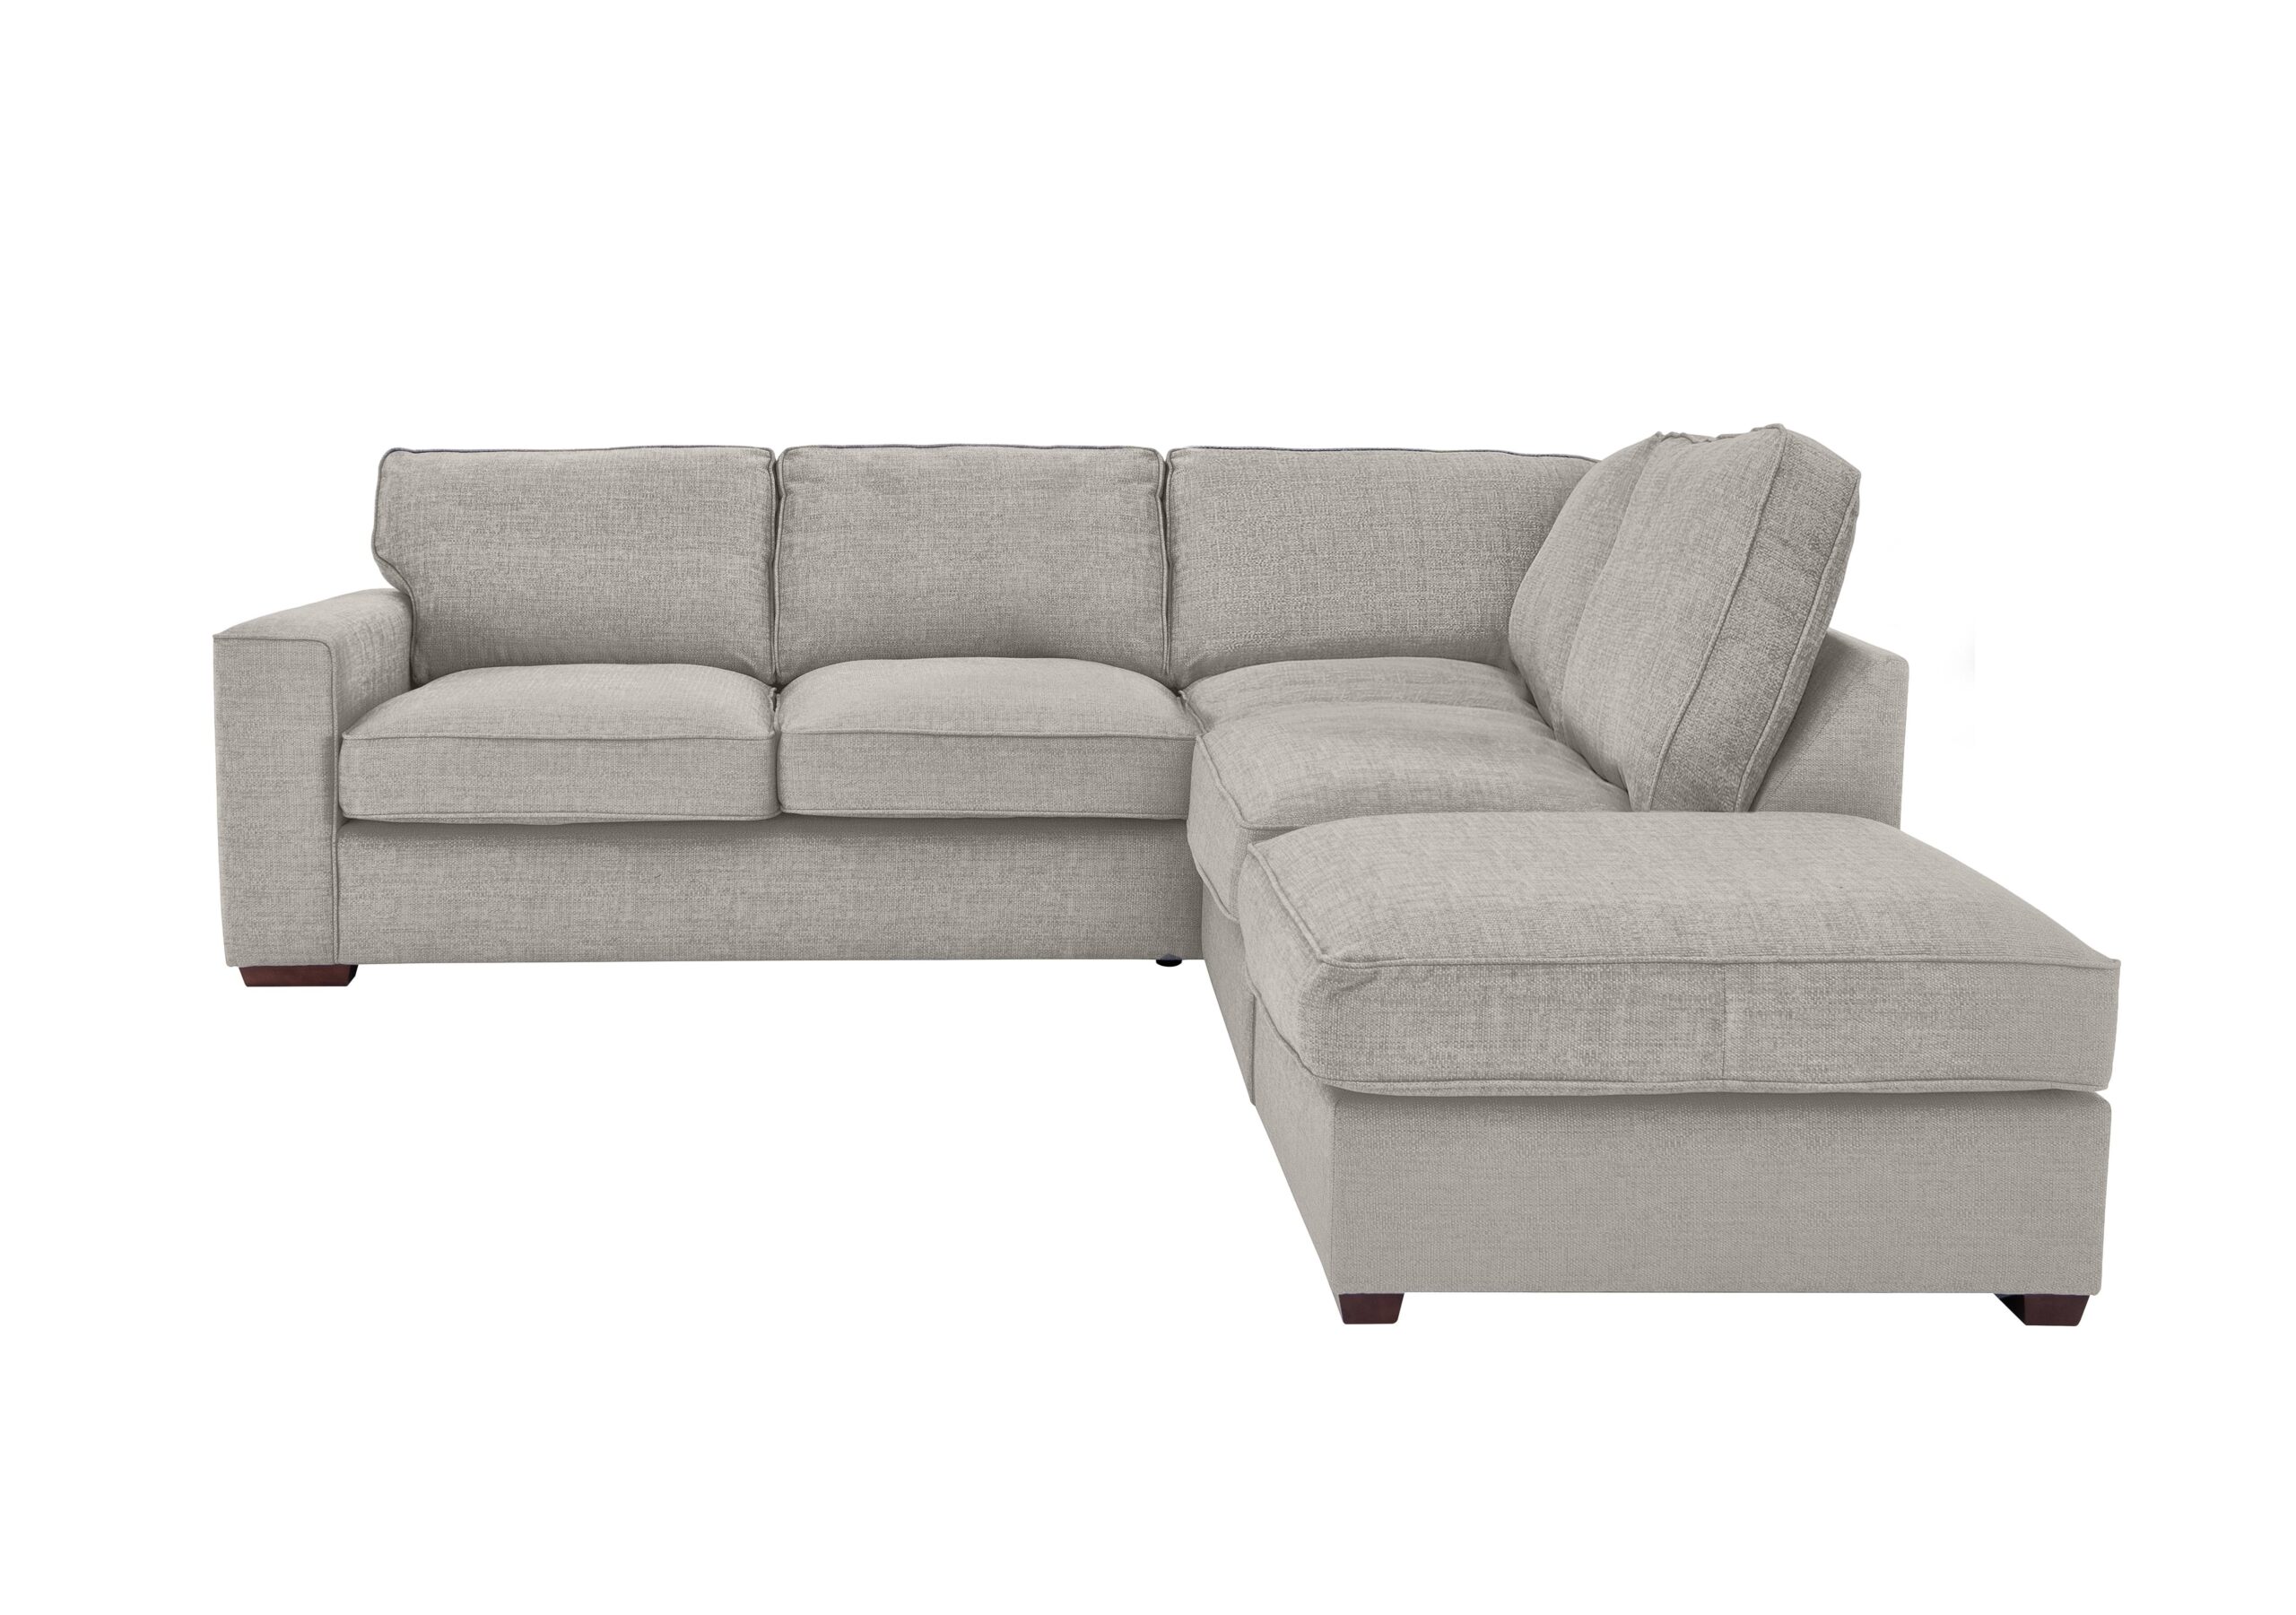 Care and maintenance of the of the
corner  sofa